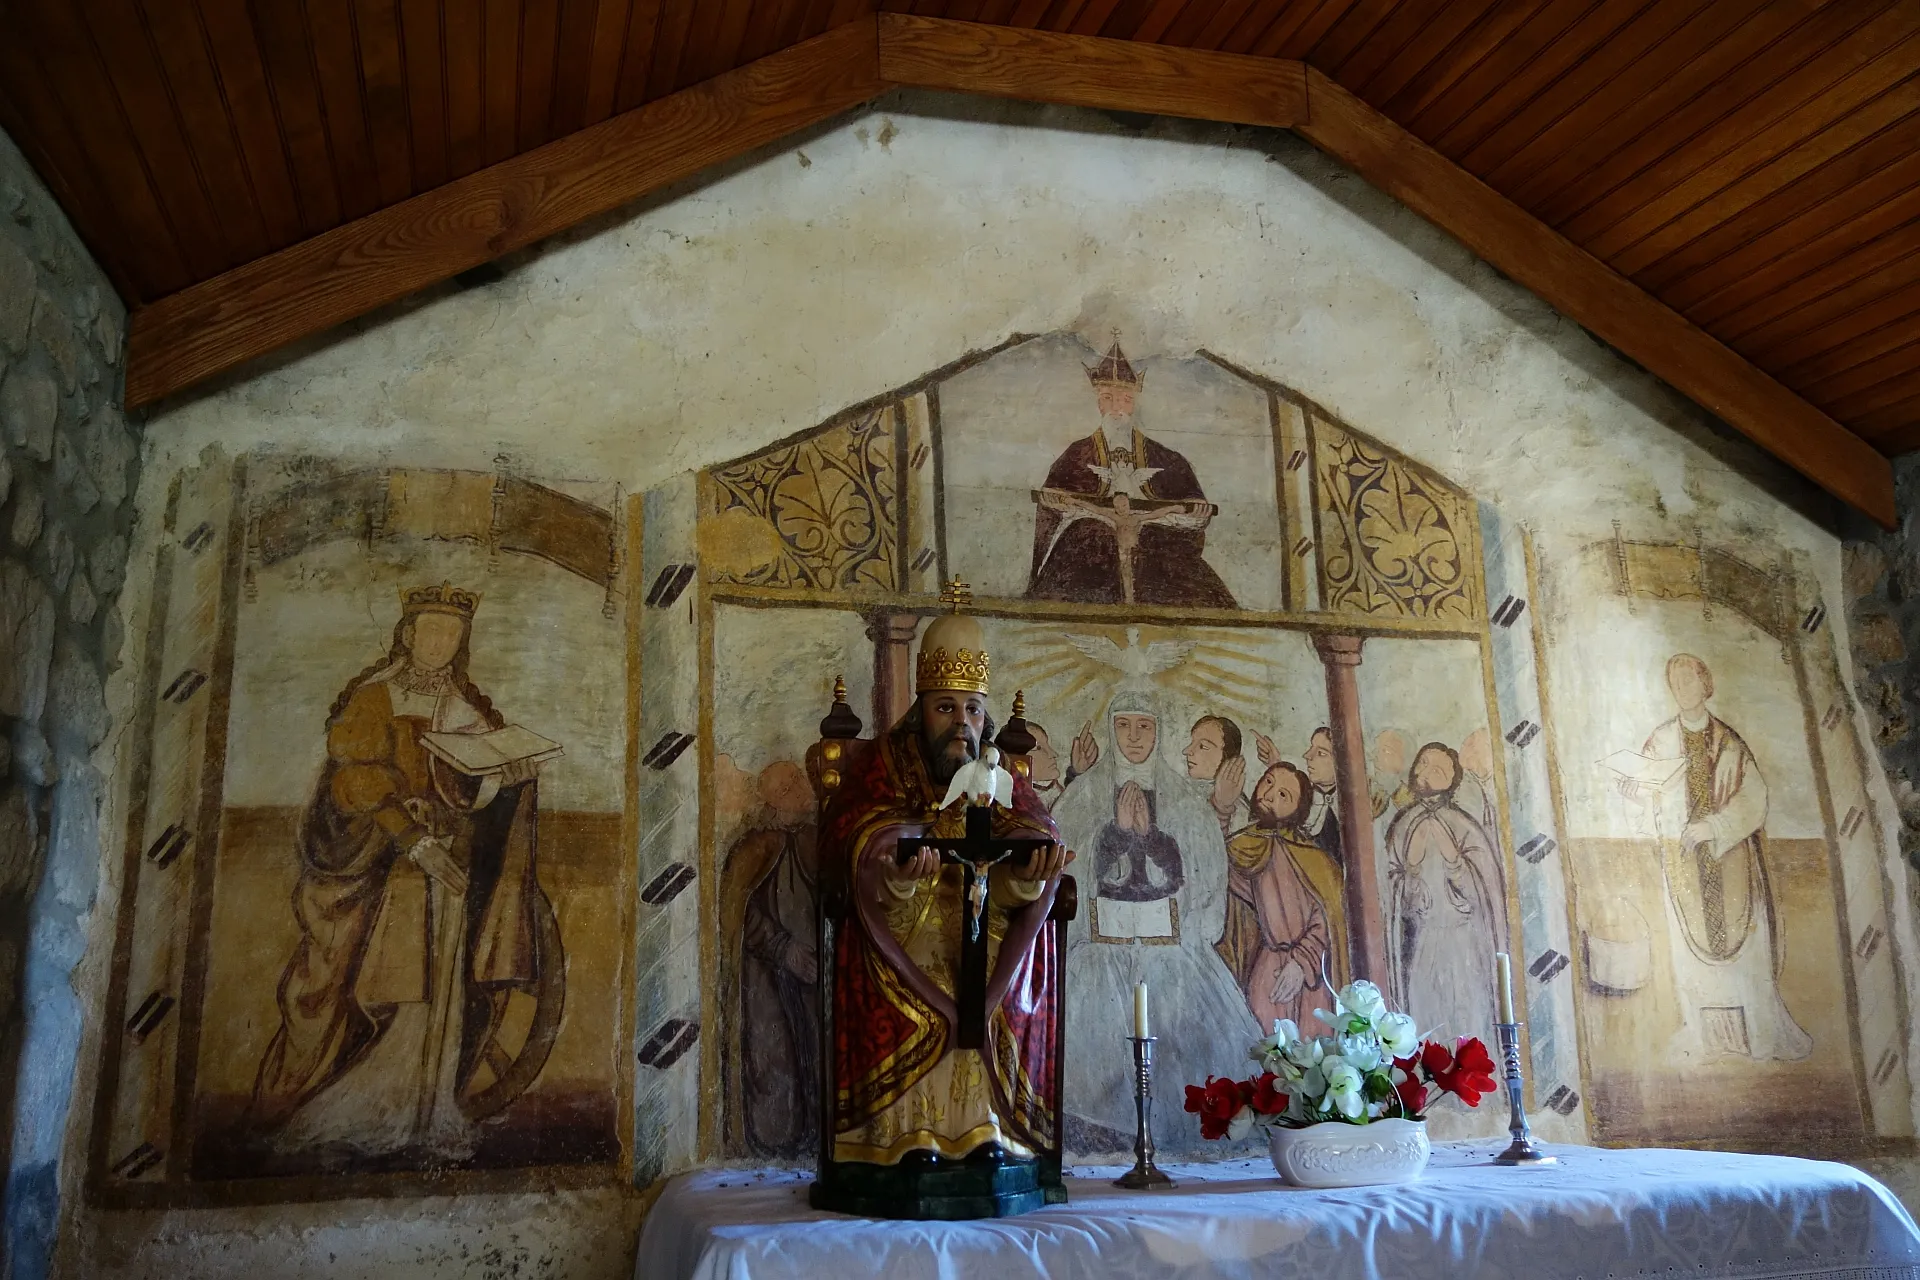 Photo showing: Mid-16th century mural painting in the Chapel of the Holy Spirit, Maçaínhas, Belmonte. There is no documentation about the authorship of the paintings, the date and their meaning, although several art historians have looked into it since their discovery in the 1980's. The panel on the left is thought to represent Saint Catherine, due to the characteristic combination of symbols: the wheel, the sword and the book. The panel on the right represents an unidentified male figure, thought to be a saint, for symmetry with Saint Catherine. The bottom of the middle panel represents the event of the Pentecost, i.e. the Holy Spirit's descent onto the apostles, with the Holy Virgin at the center of the picture. The top of the middle panel represents the Holy Trinity. (See repositorio.ucp.pt/bitstream/10400.14/4455/4/LS_S2_13-14_...)

The statue of the Holy Trinity that has been placed in front of the mural is more recent.